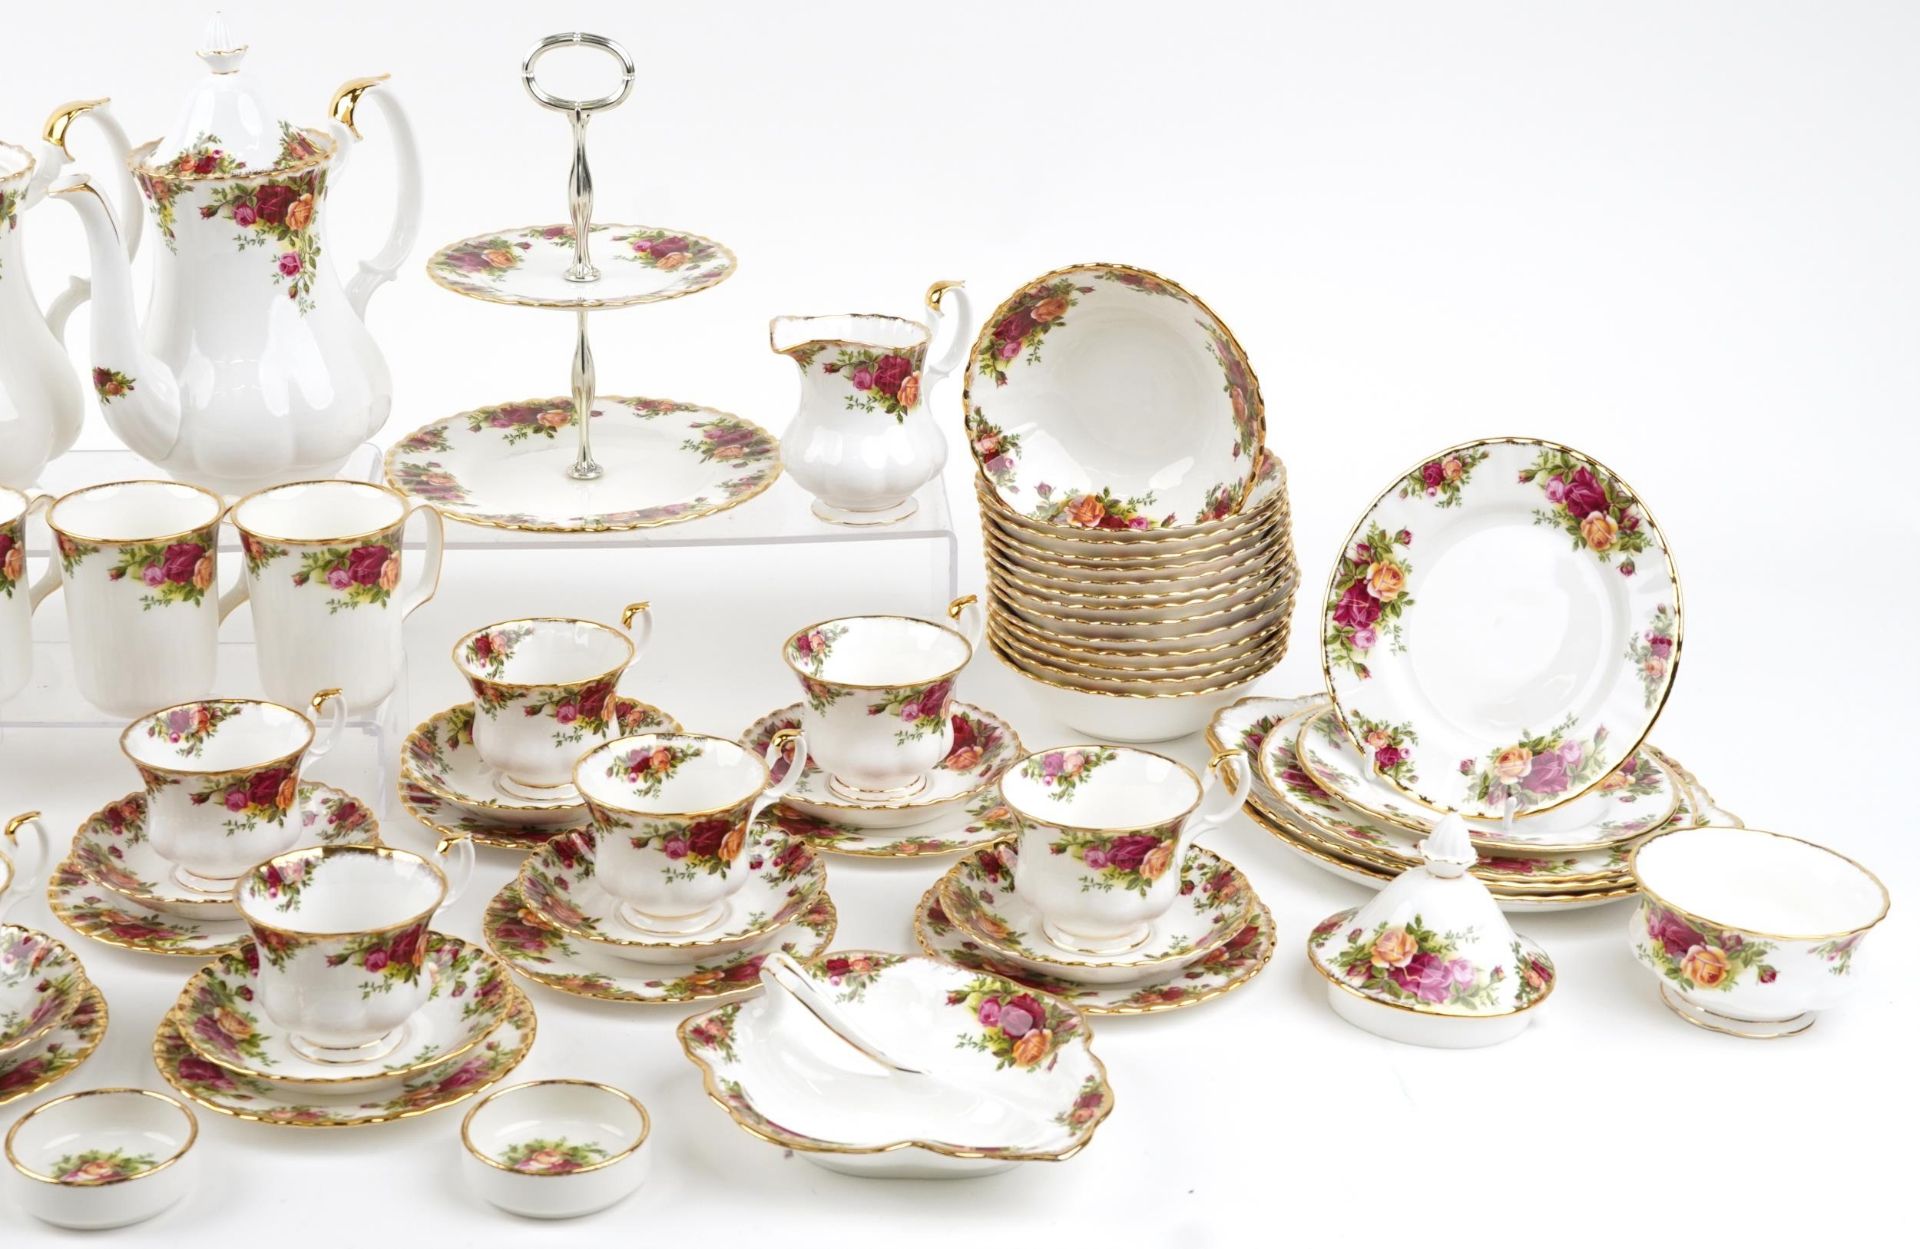 Large collection of Royal Albert Old Country Roses dinner and teaware, predominantly firsts - Image 3 of 4